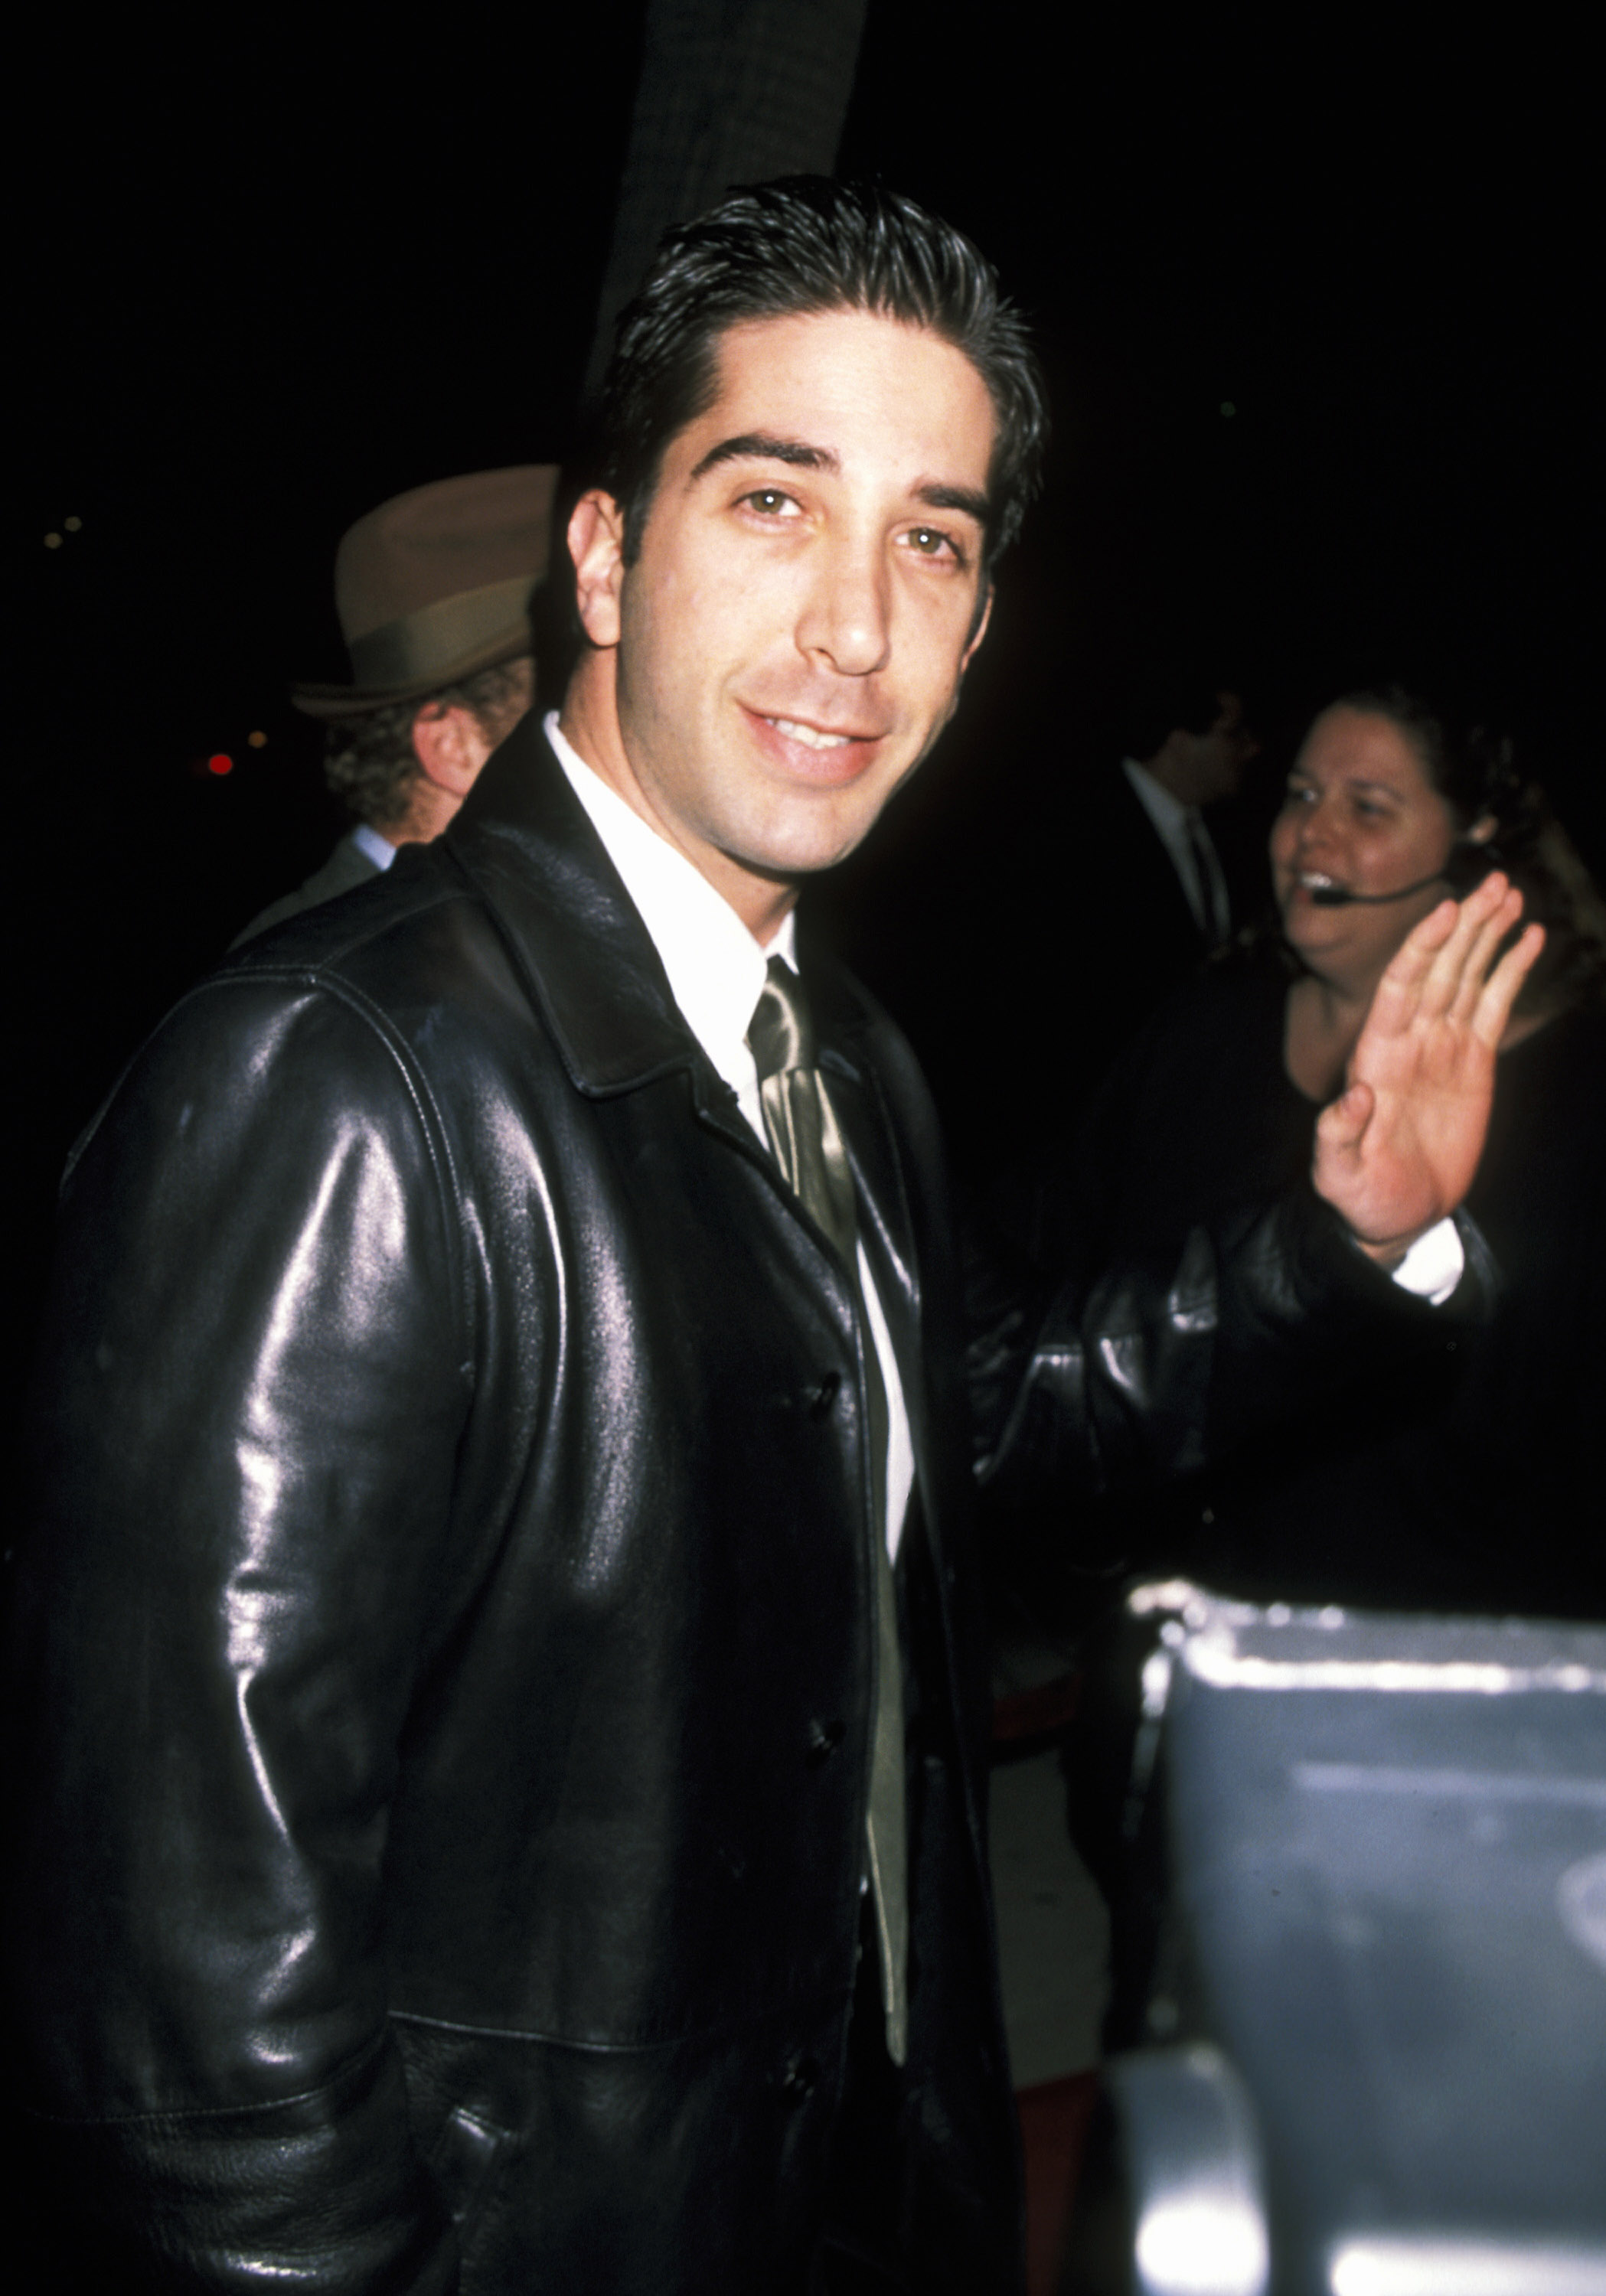 David Schwimmer at the premiere of "Georgia" in Beverly Hills, California | Source: Getty Images